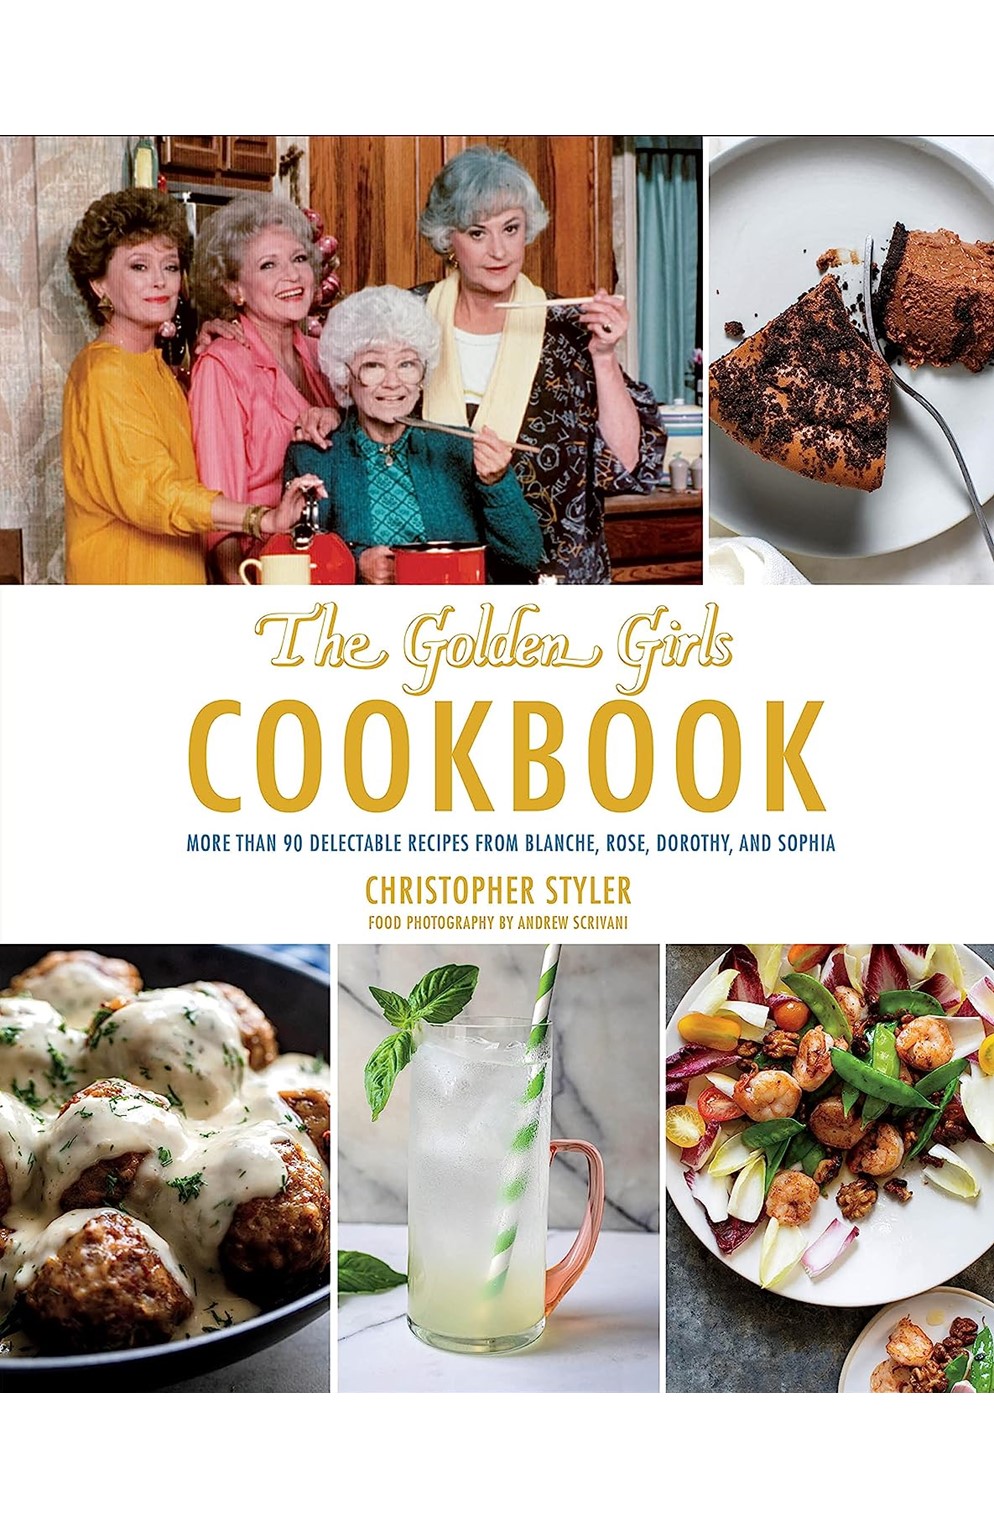 The Golden Girls Cookbook: More Than 90 Delectable Recipes From Blanche, Rose, Dorothy, And Sophia